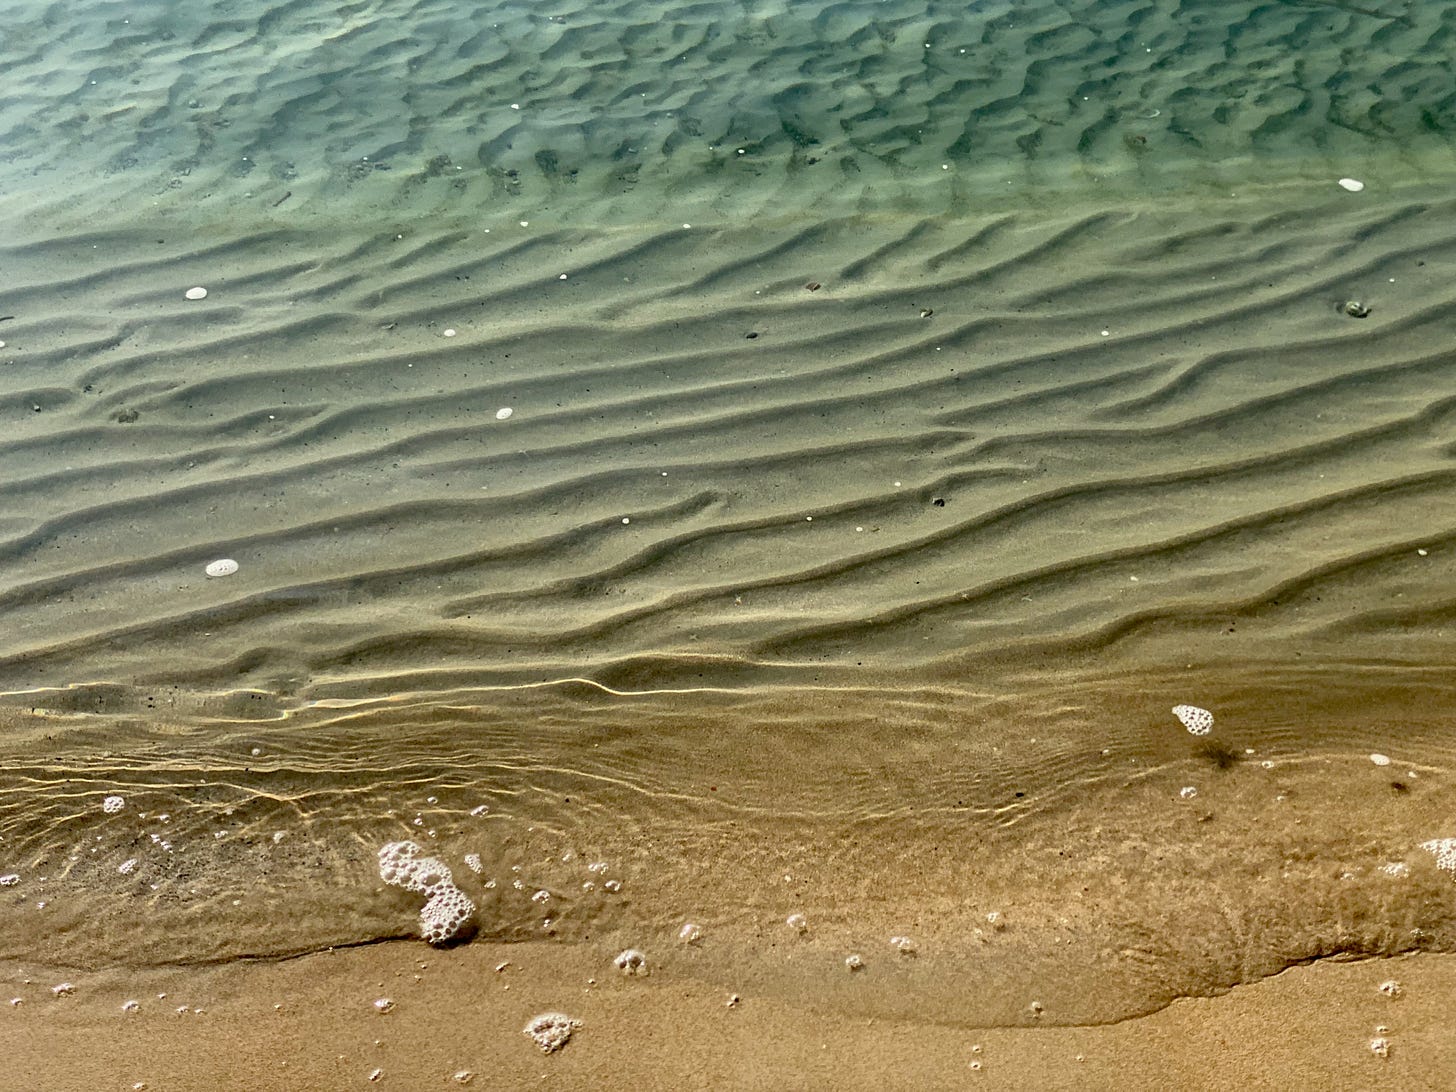 Beach: sunlit shallows, with contrasting patterns of ripples in the sand beneath the water